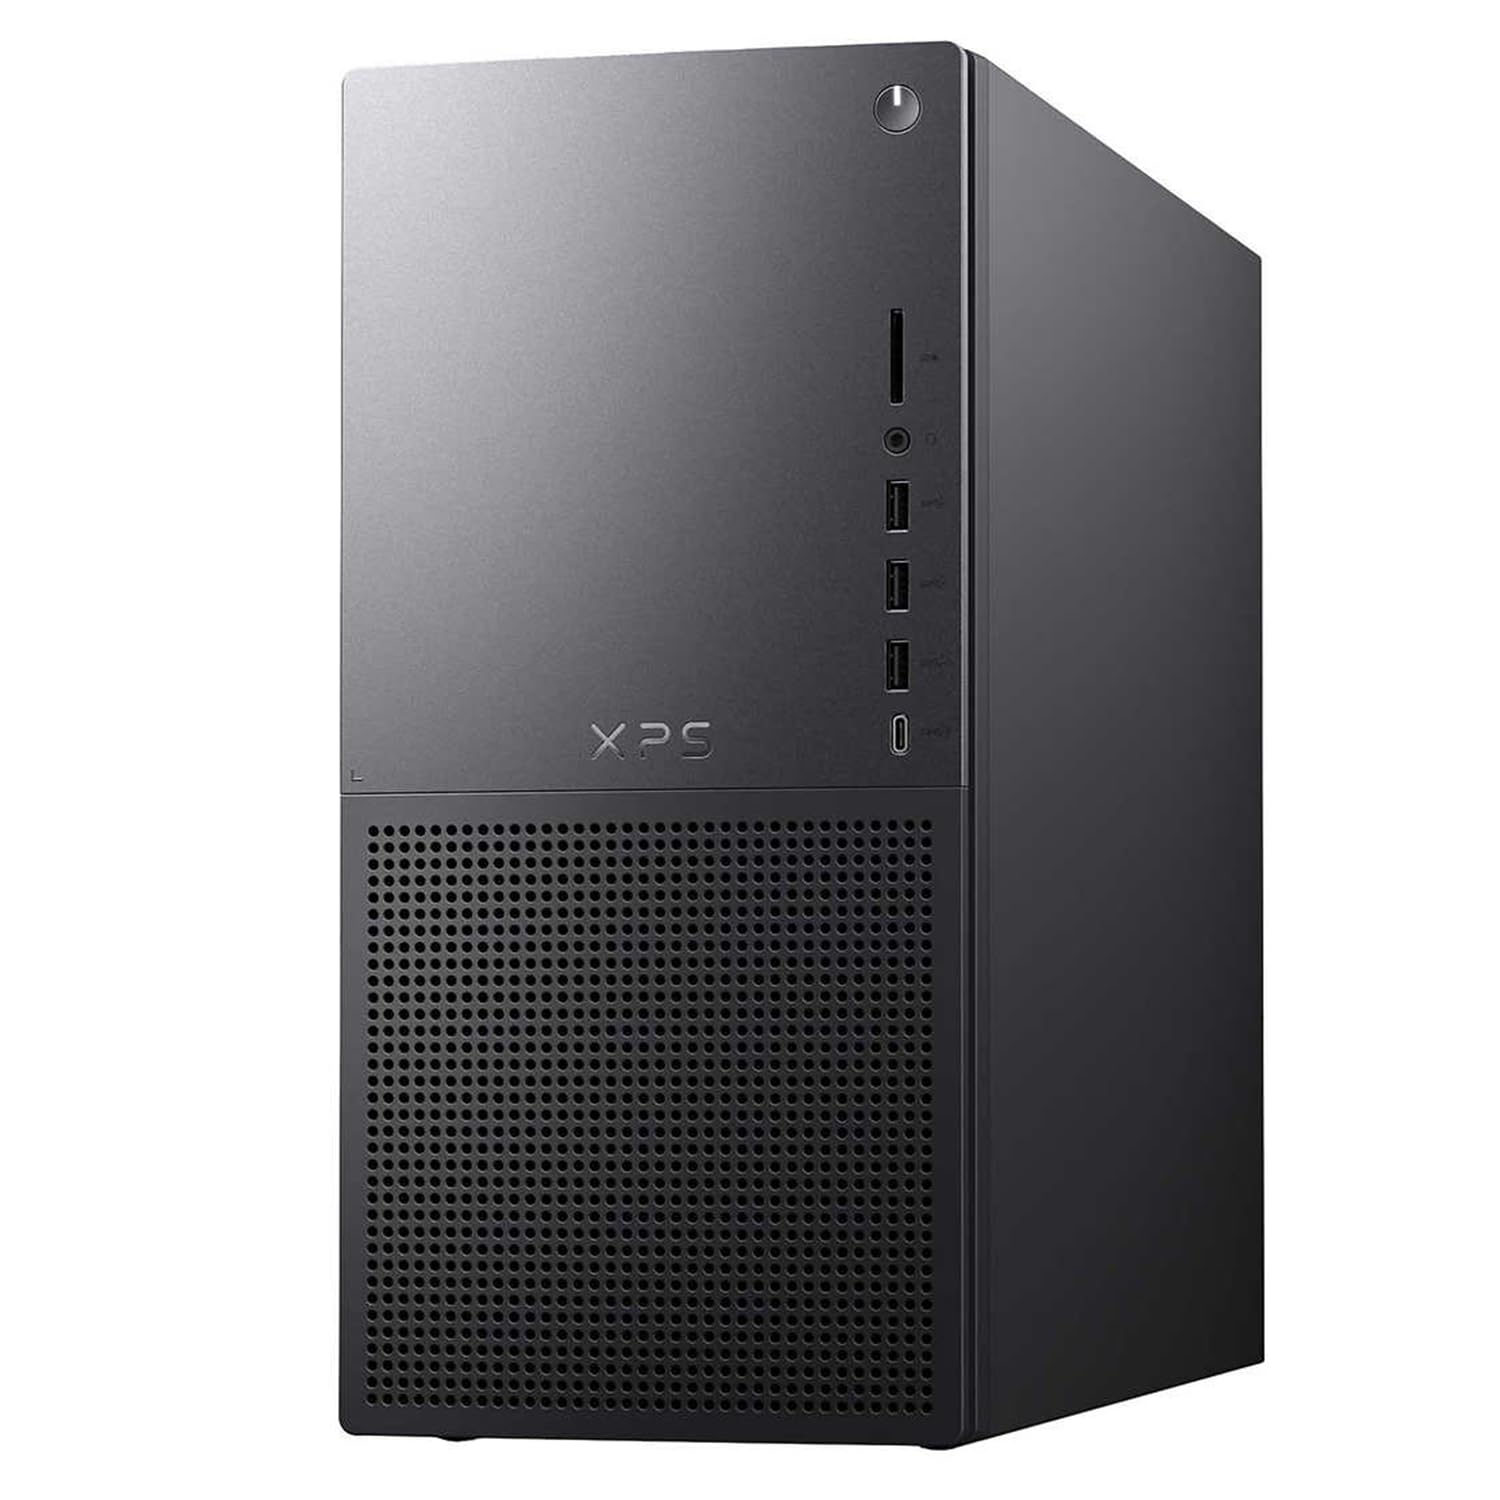 Dell Newest Business XPS 8960 Tower Desktop Computer, Intel Core i7-13700, 32GB DDR5 RAM, 2TB SSD, DisplayPort, Killer Wi-Fi 6, Wired Keyboard&Mouse, Windows 11 Pro